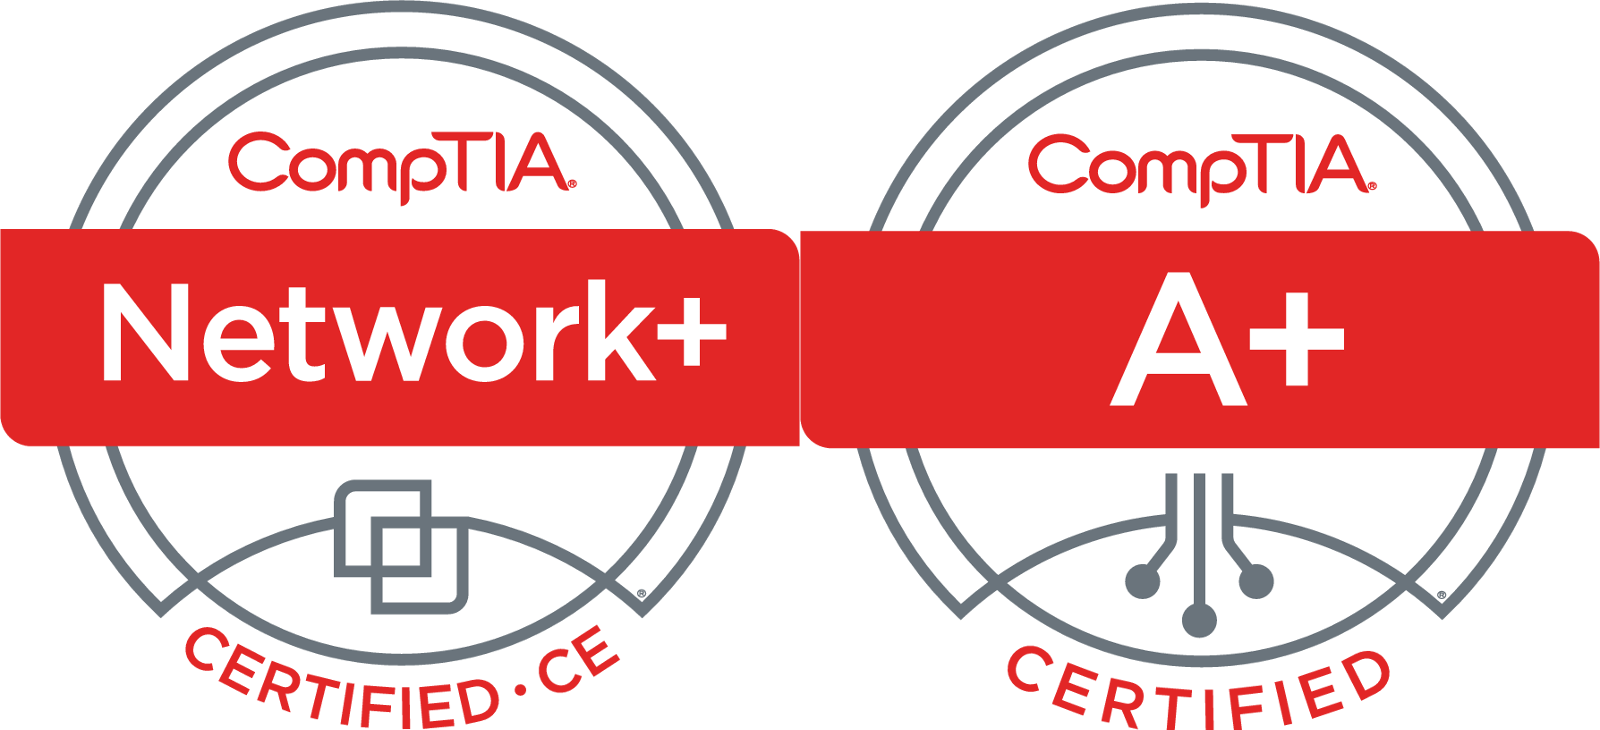 compTia Network Certified